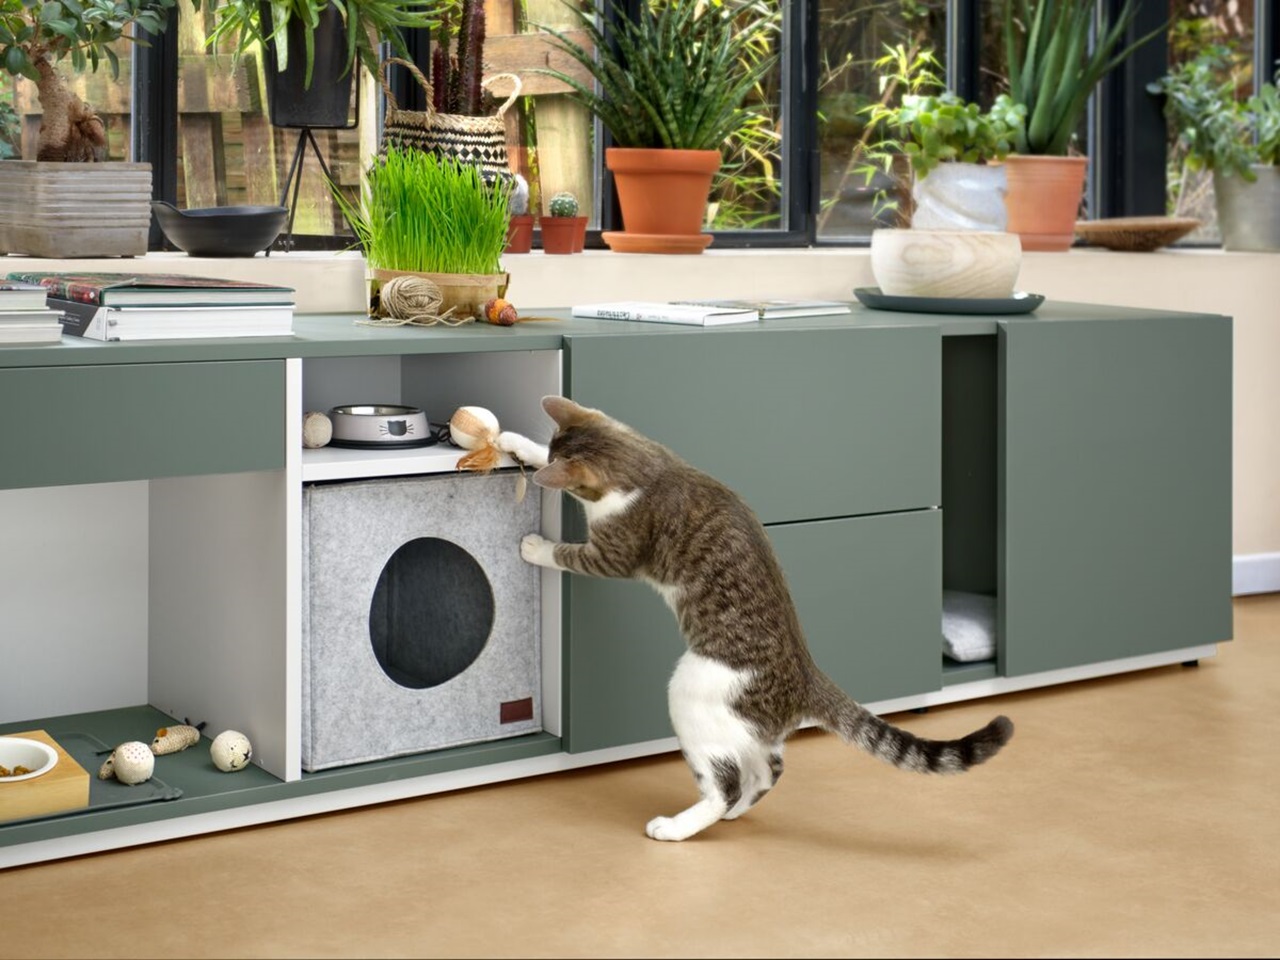 Kitchen or lounge base unit with storage possibilities for animal food and accessories